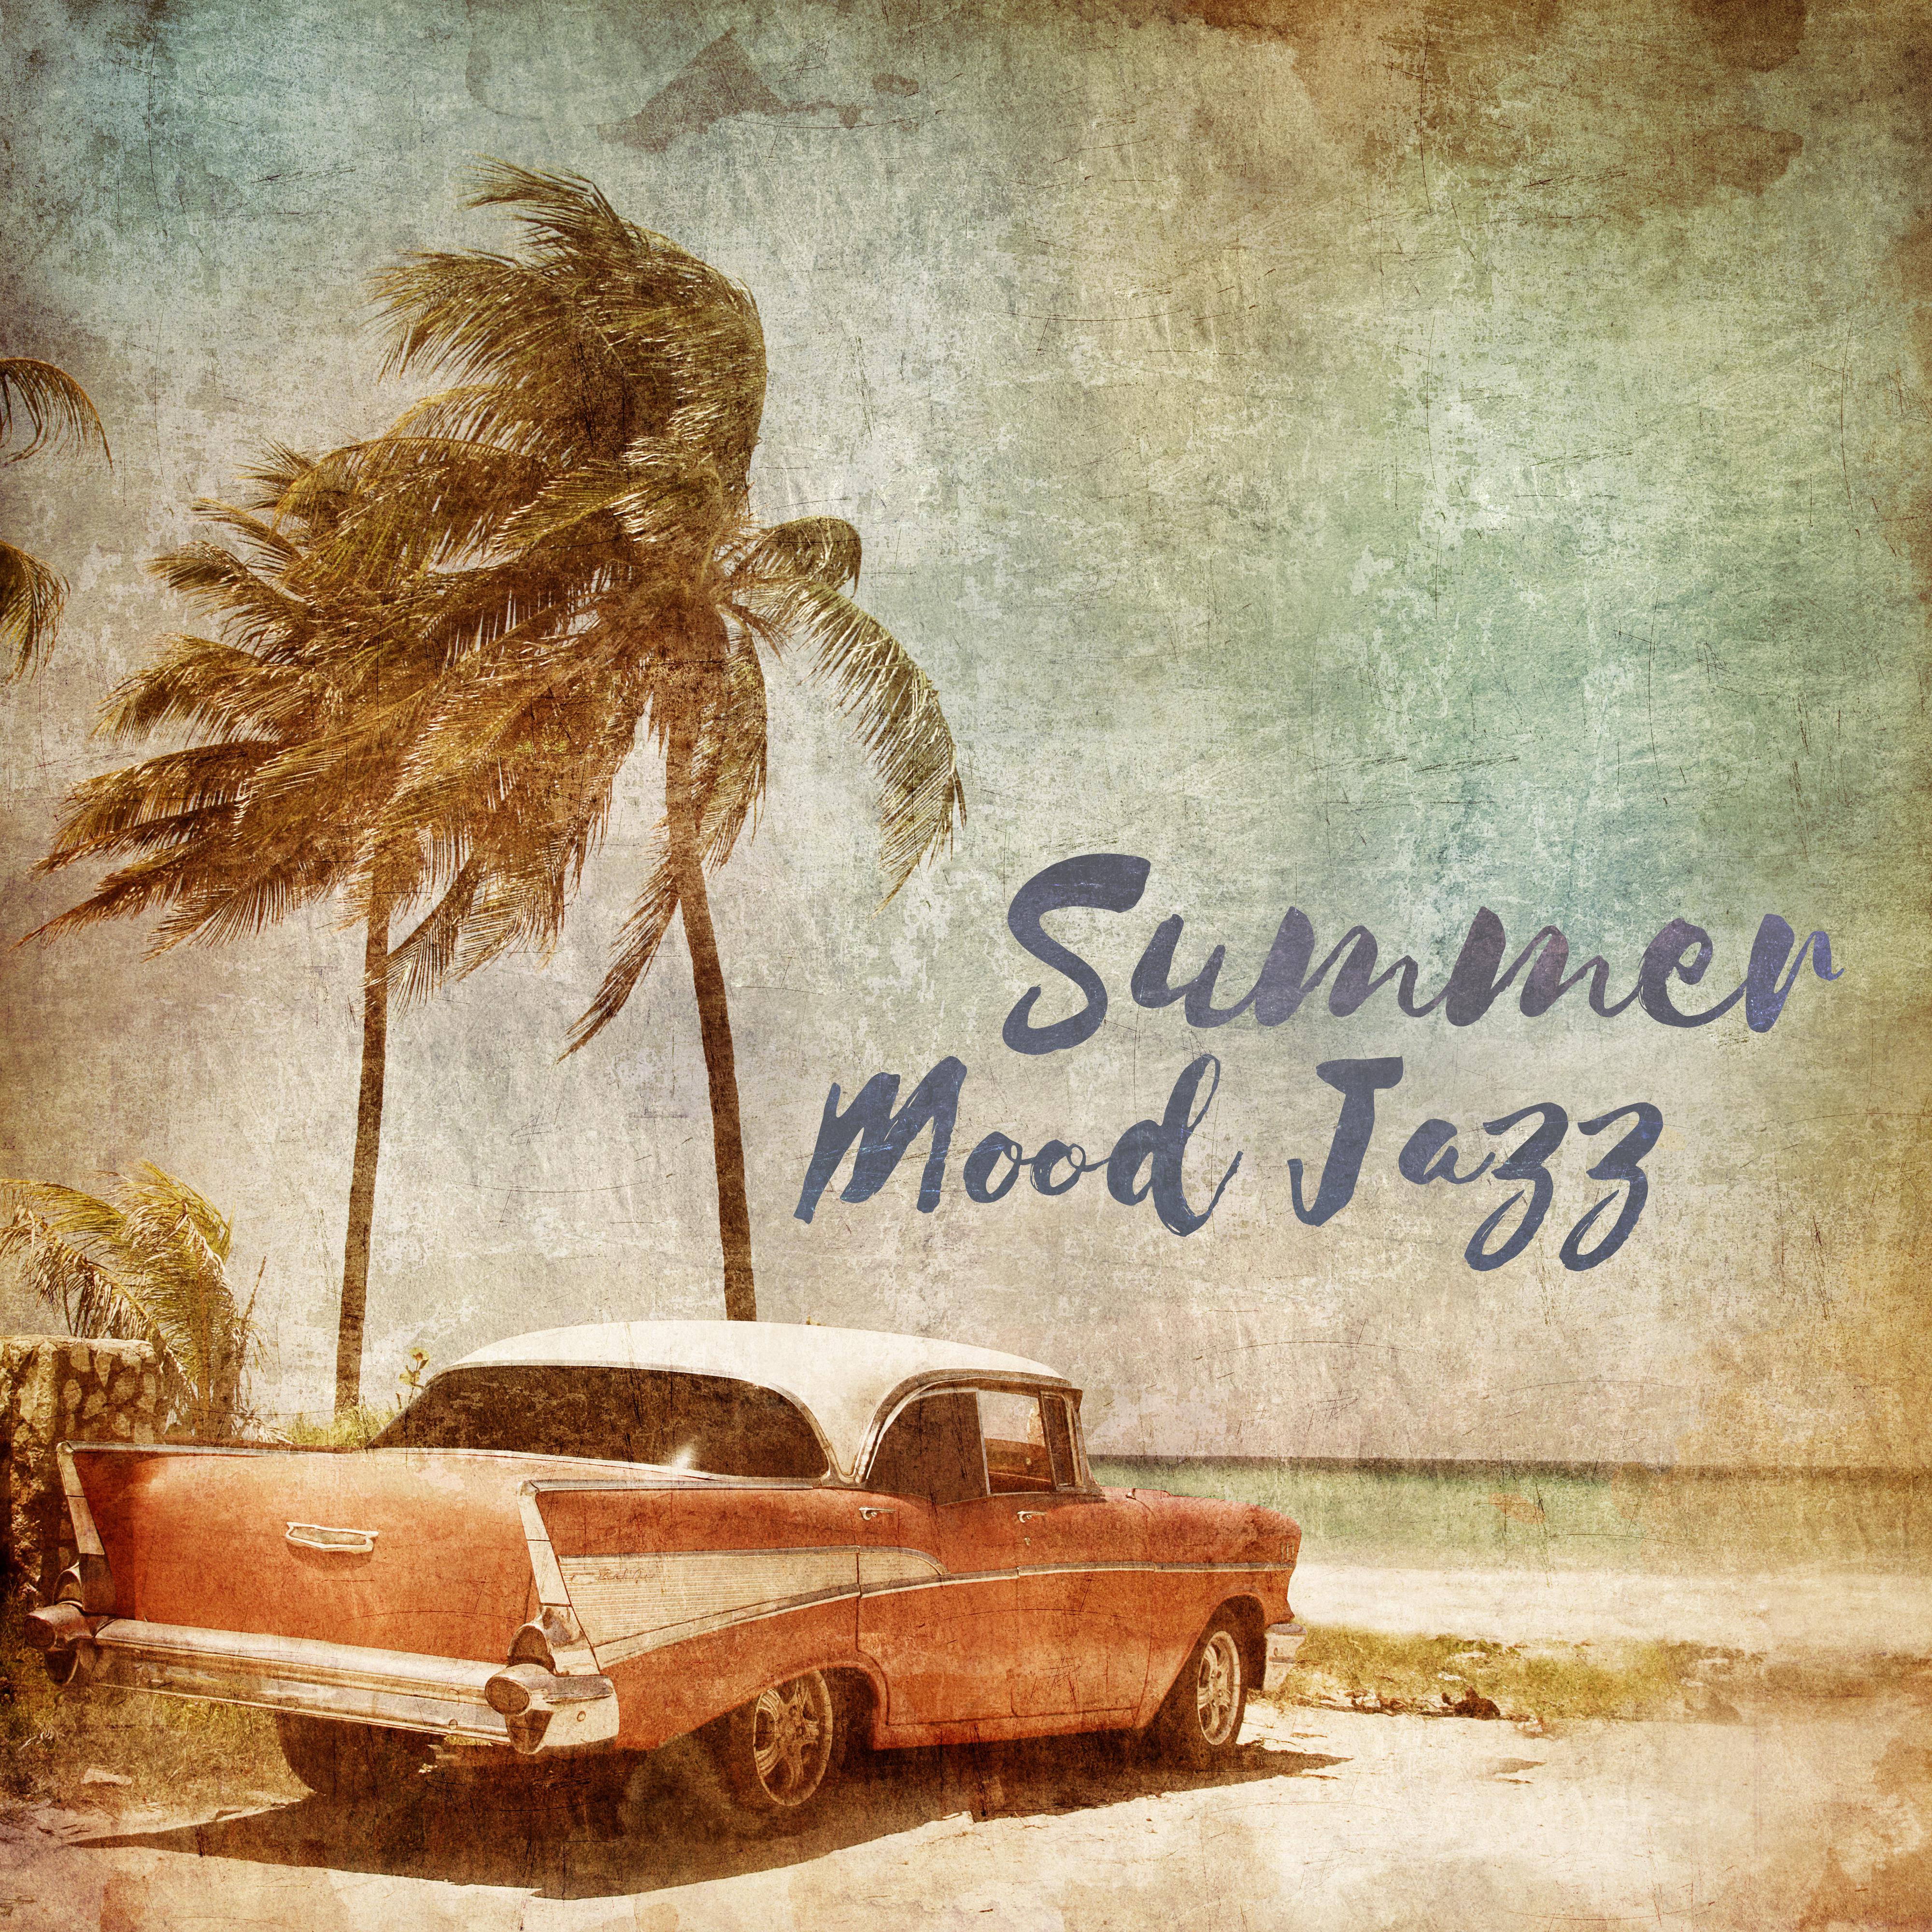 Summer Mood Jazz - Light Holiday Compositions for Listening, Relaxation and Lounging